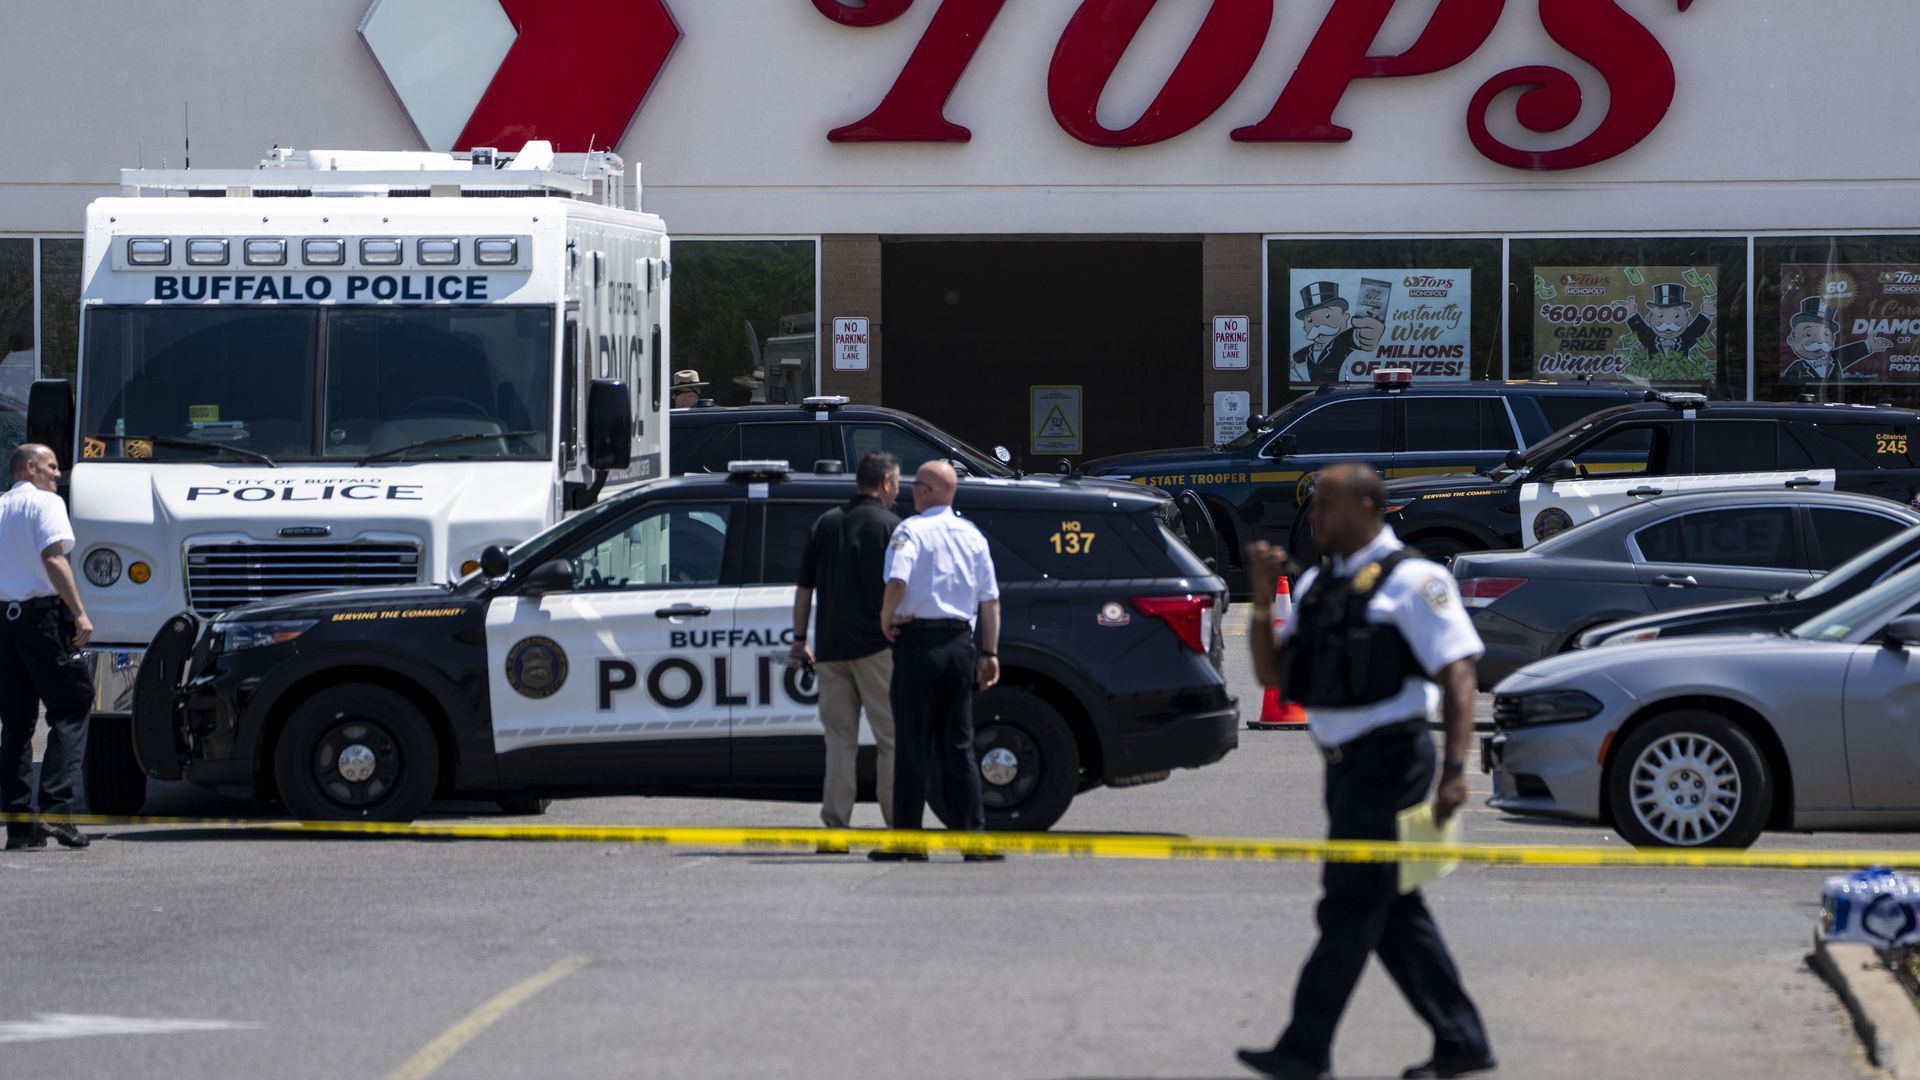 Law enforcement officials at the scene of a mass shooting at Tops grocery store in Buffalo, New York, on May 15, 2022.